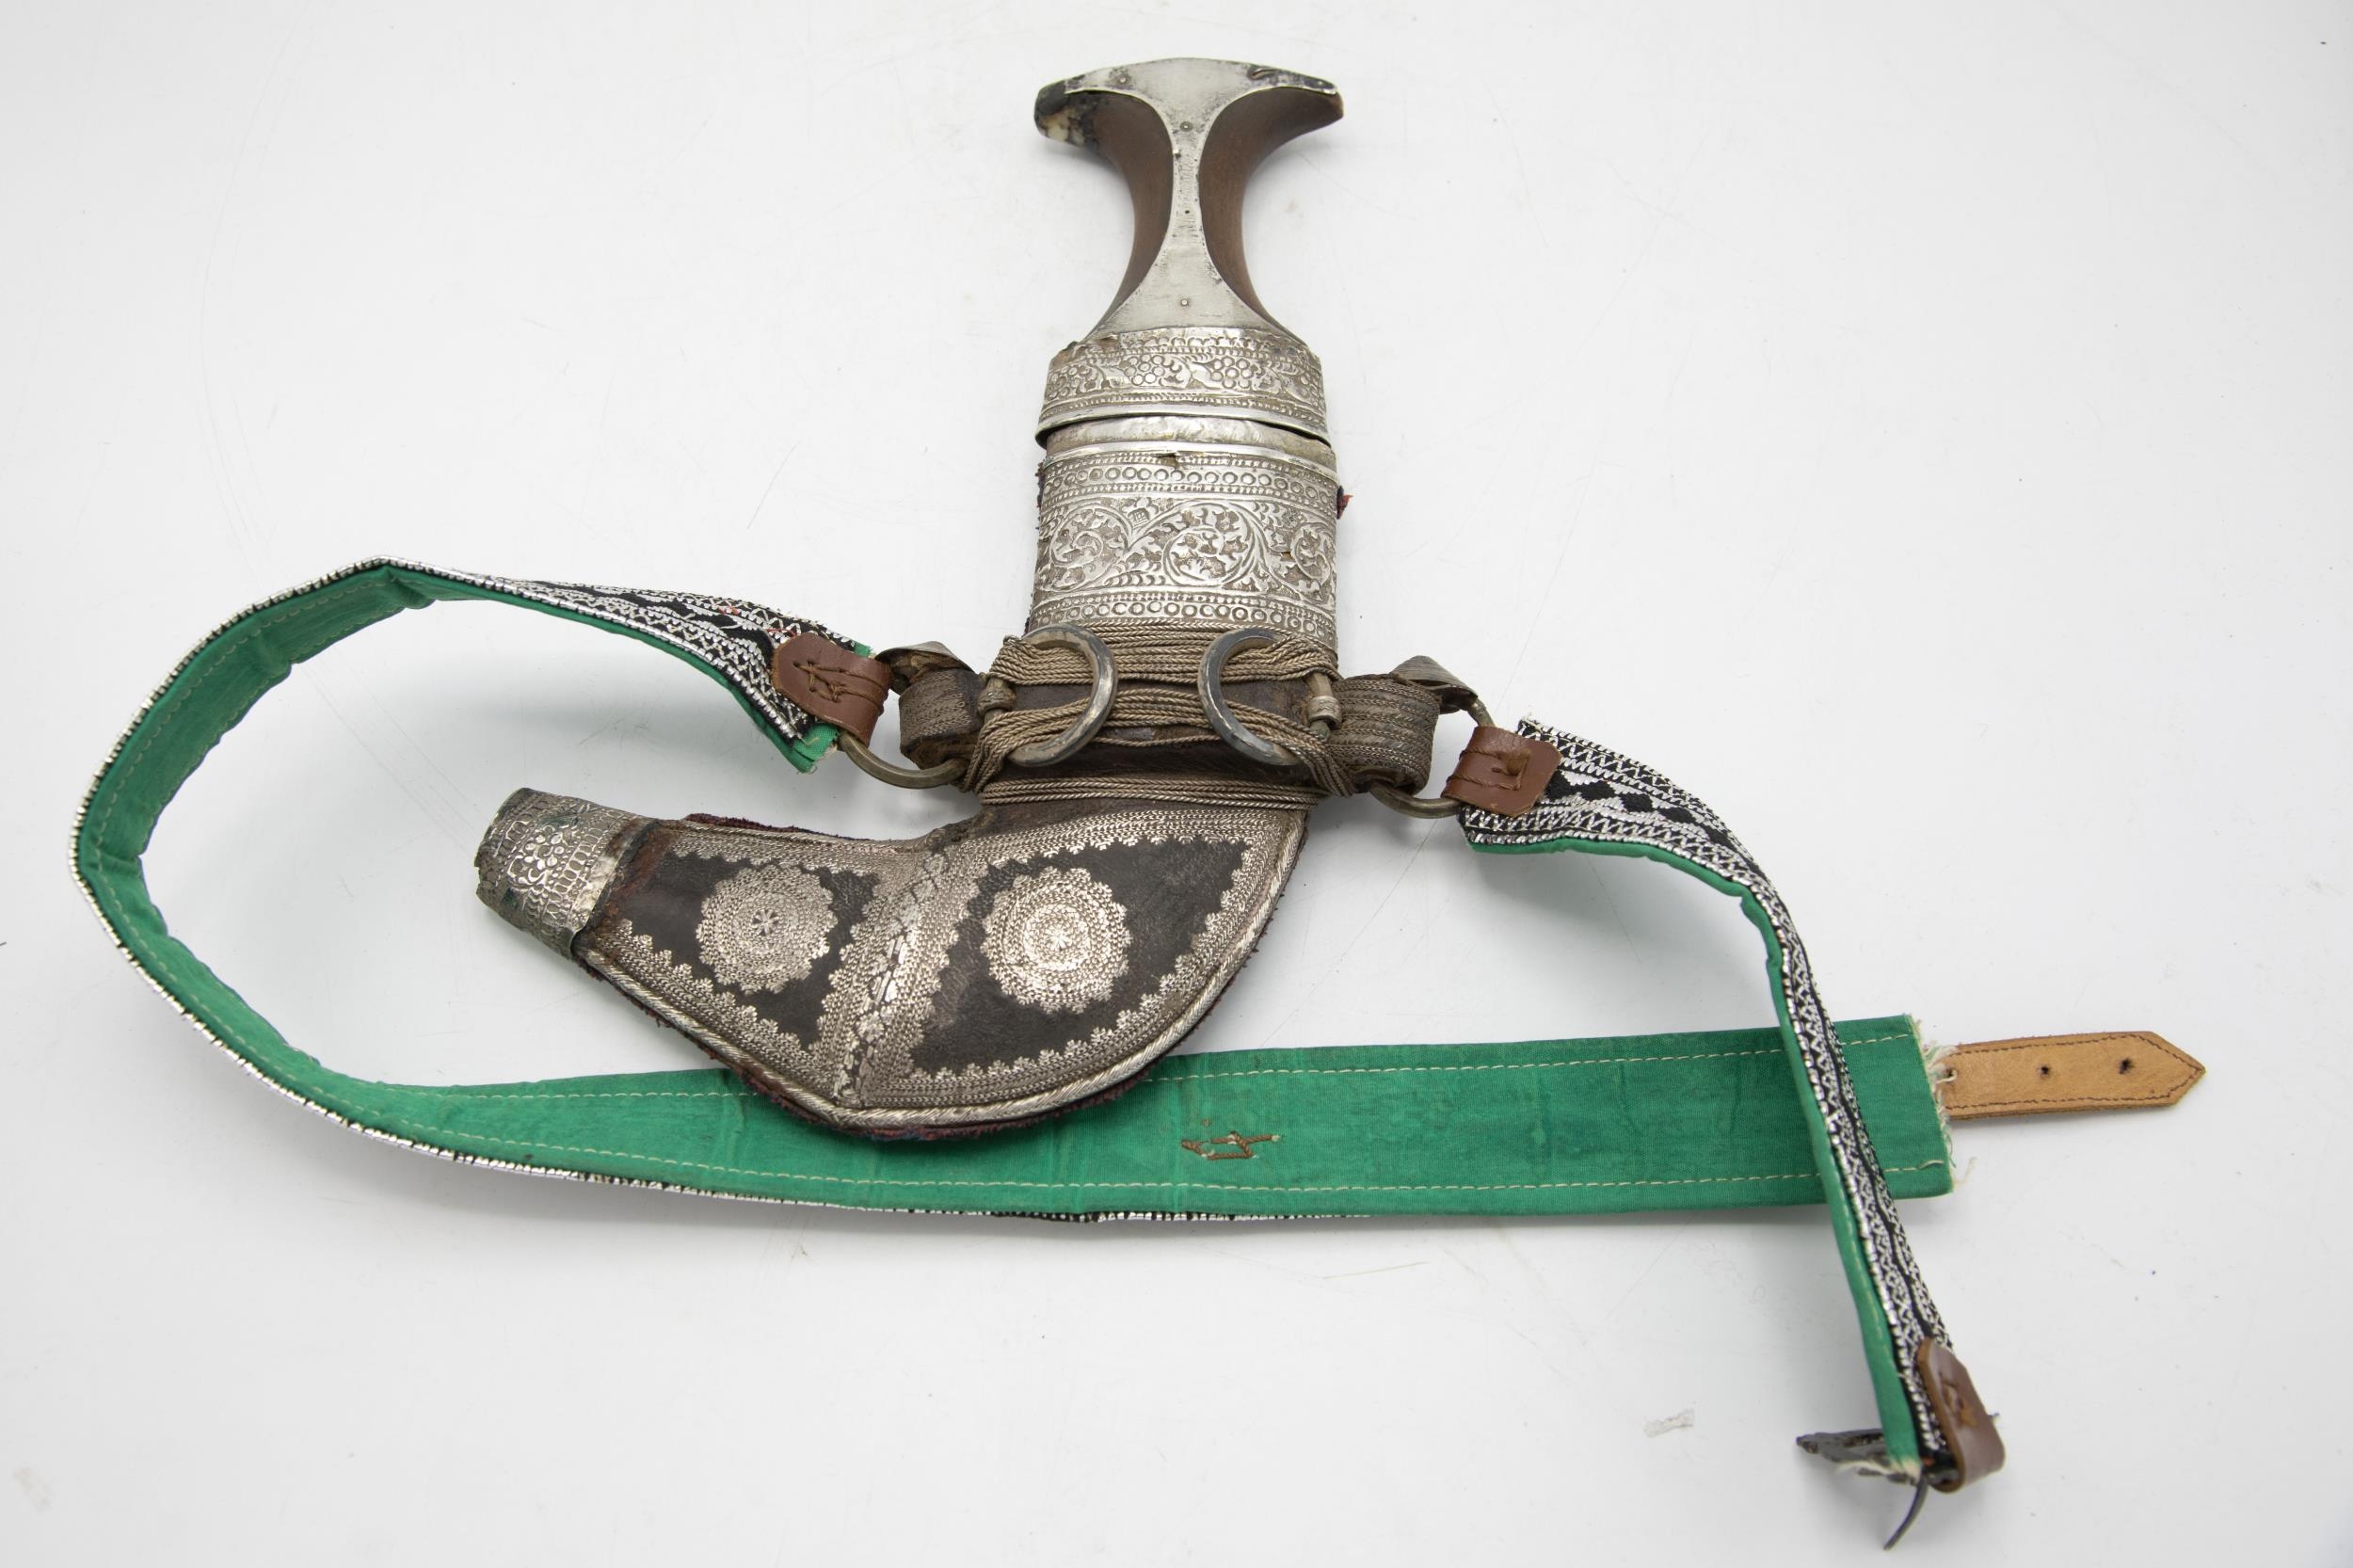 Turn of the century Persian Ottoman Jambiya dagger and belt in a goof silver sheath and silver